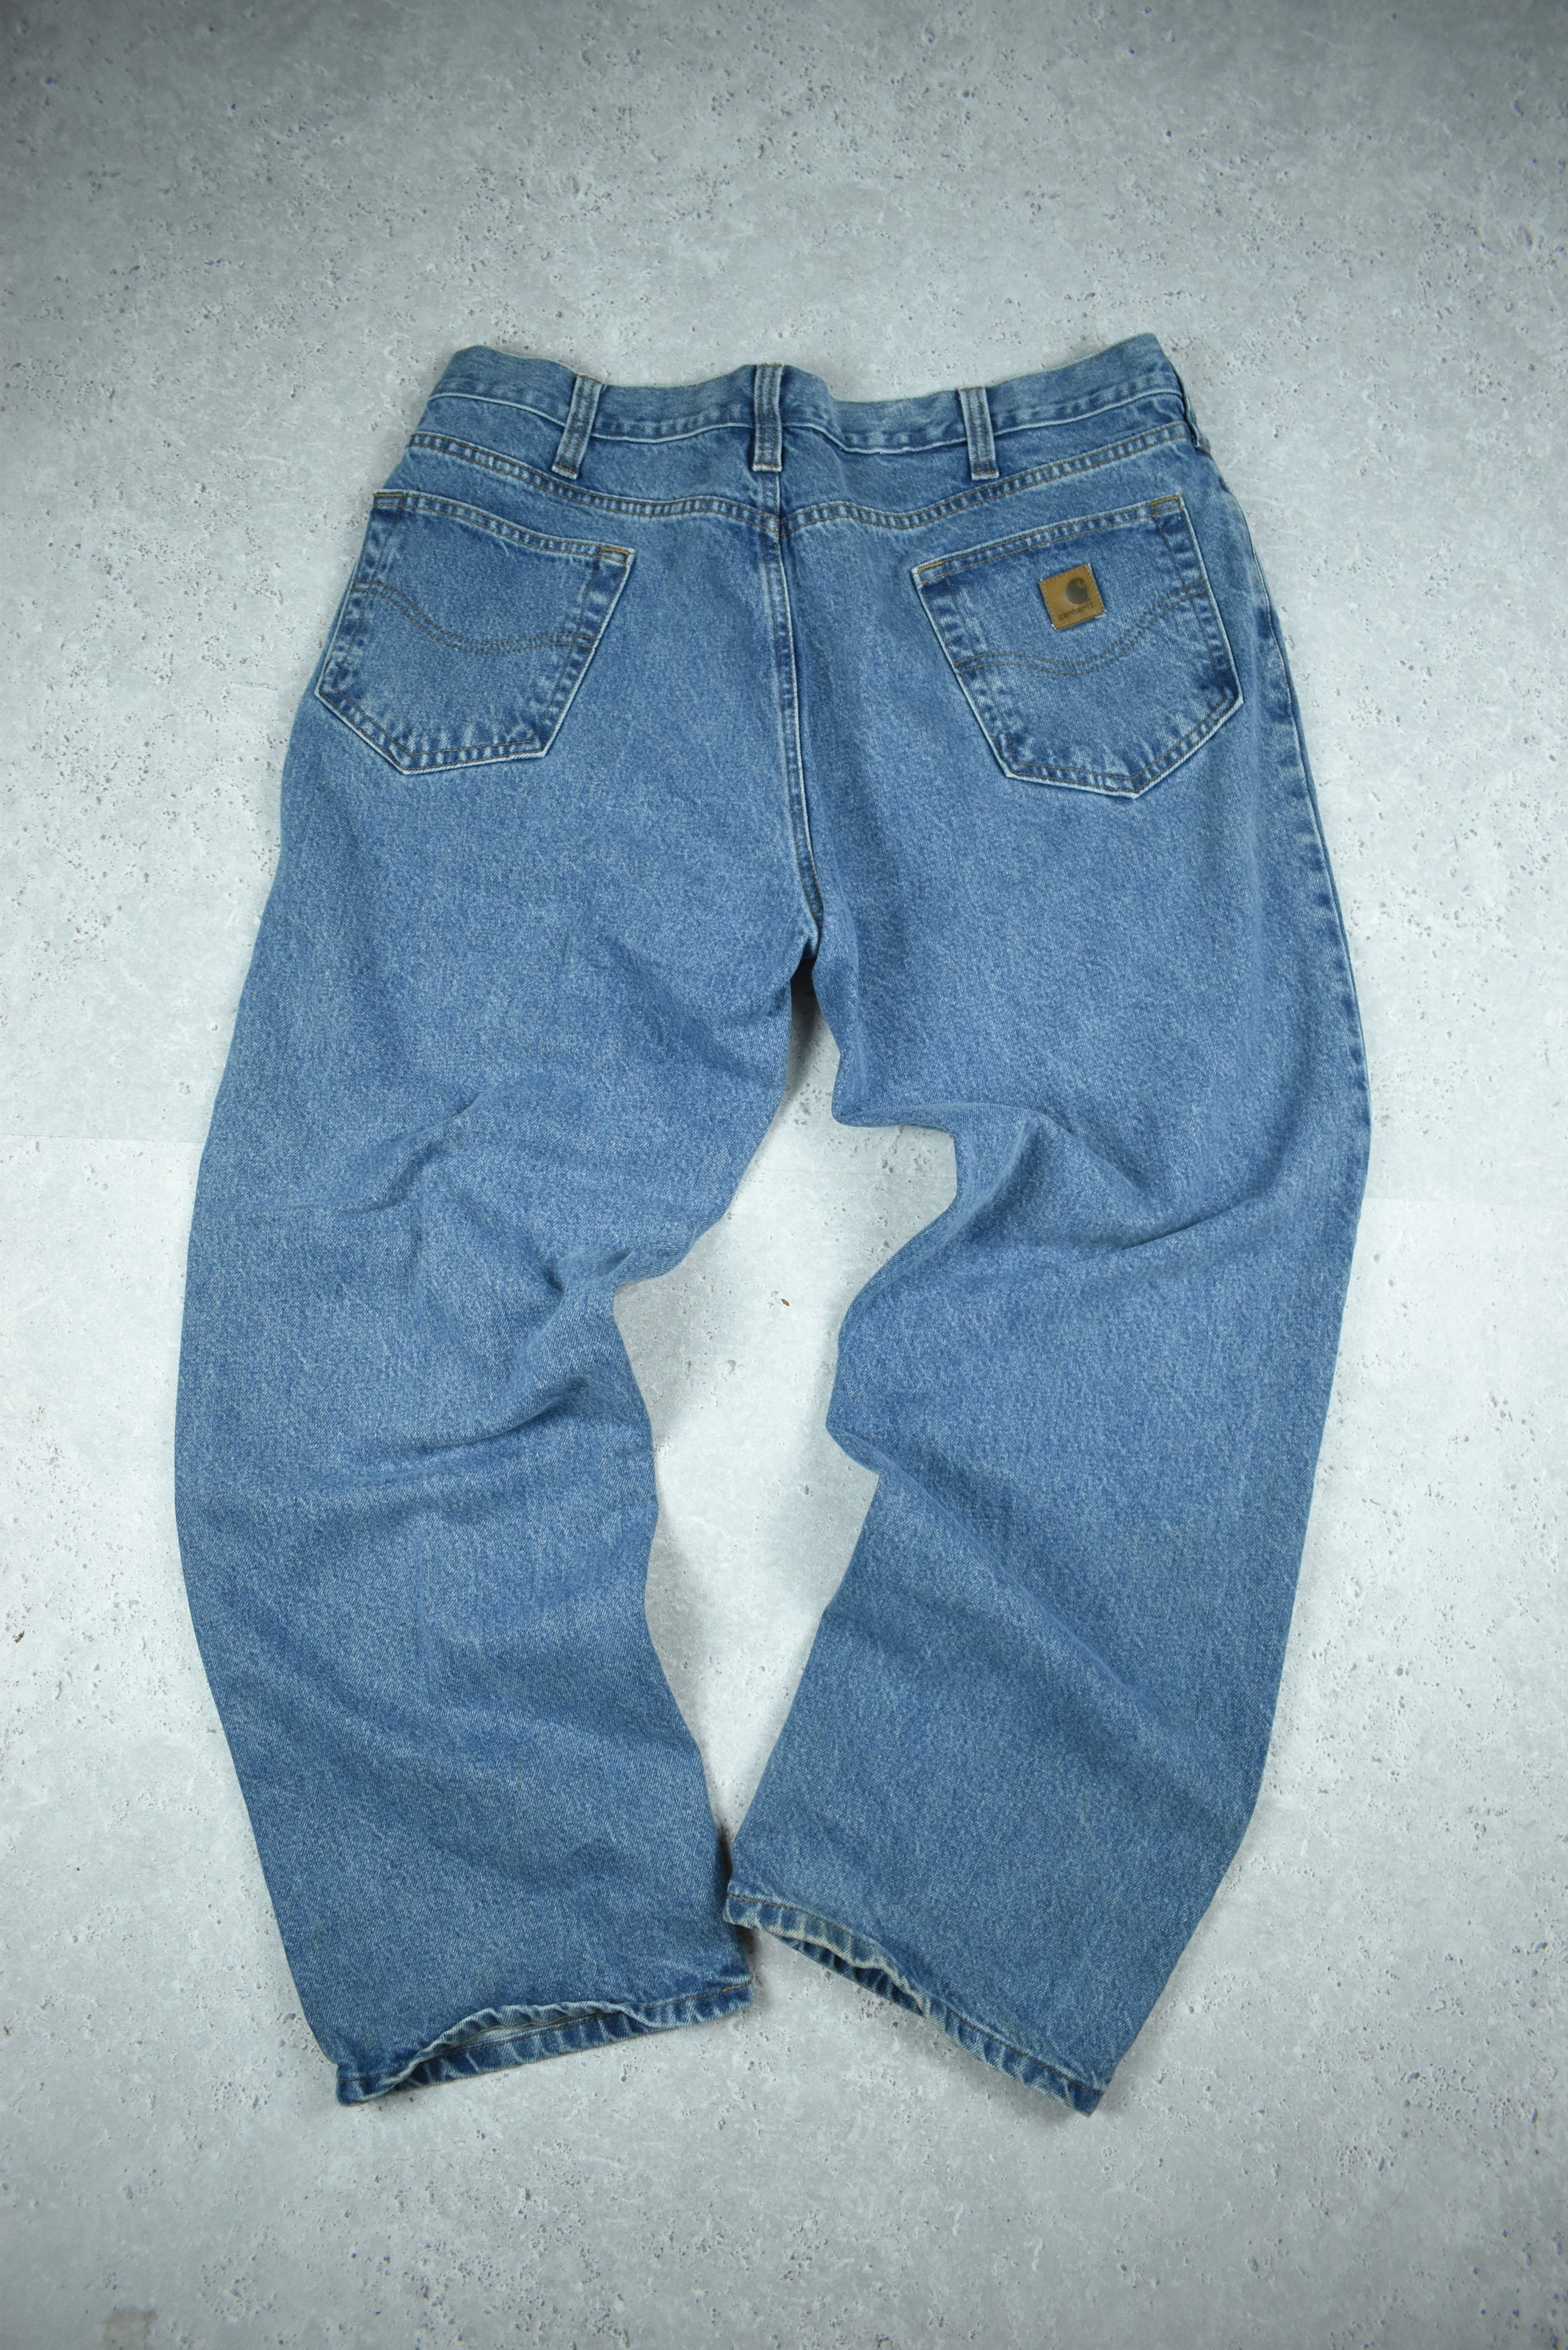 Vintage Carhartt Relaxed Fit Denim Jeans 38x32